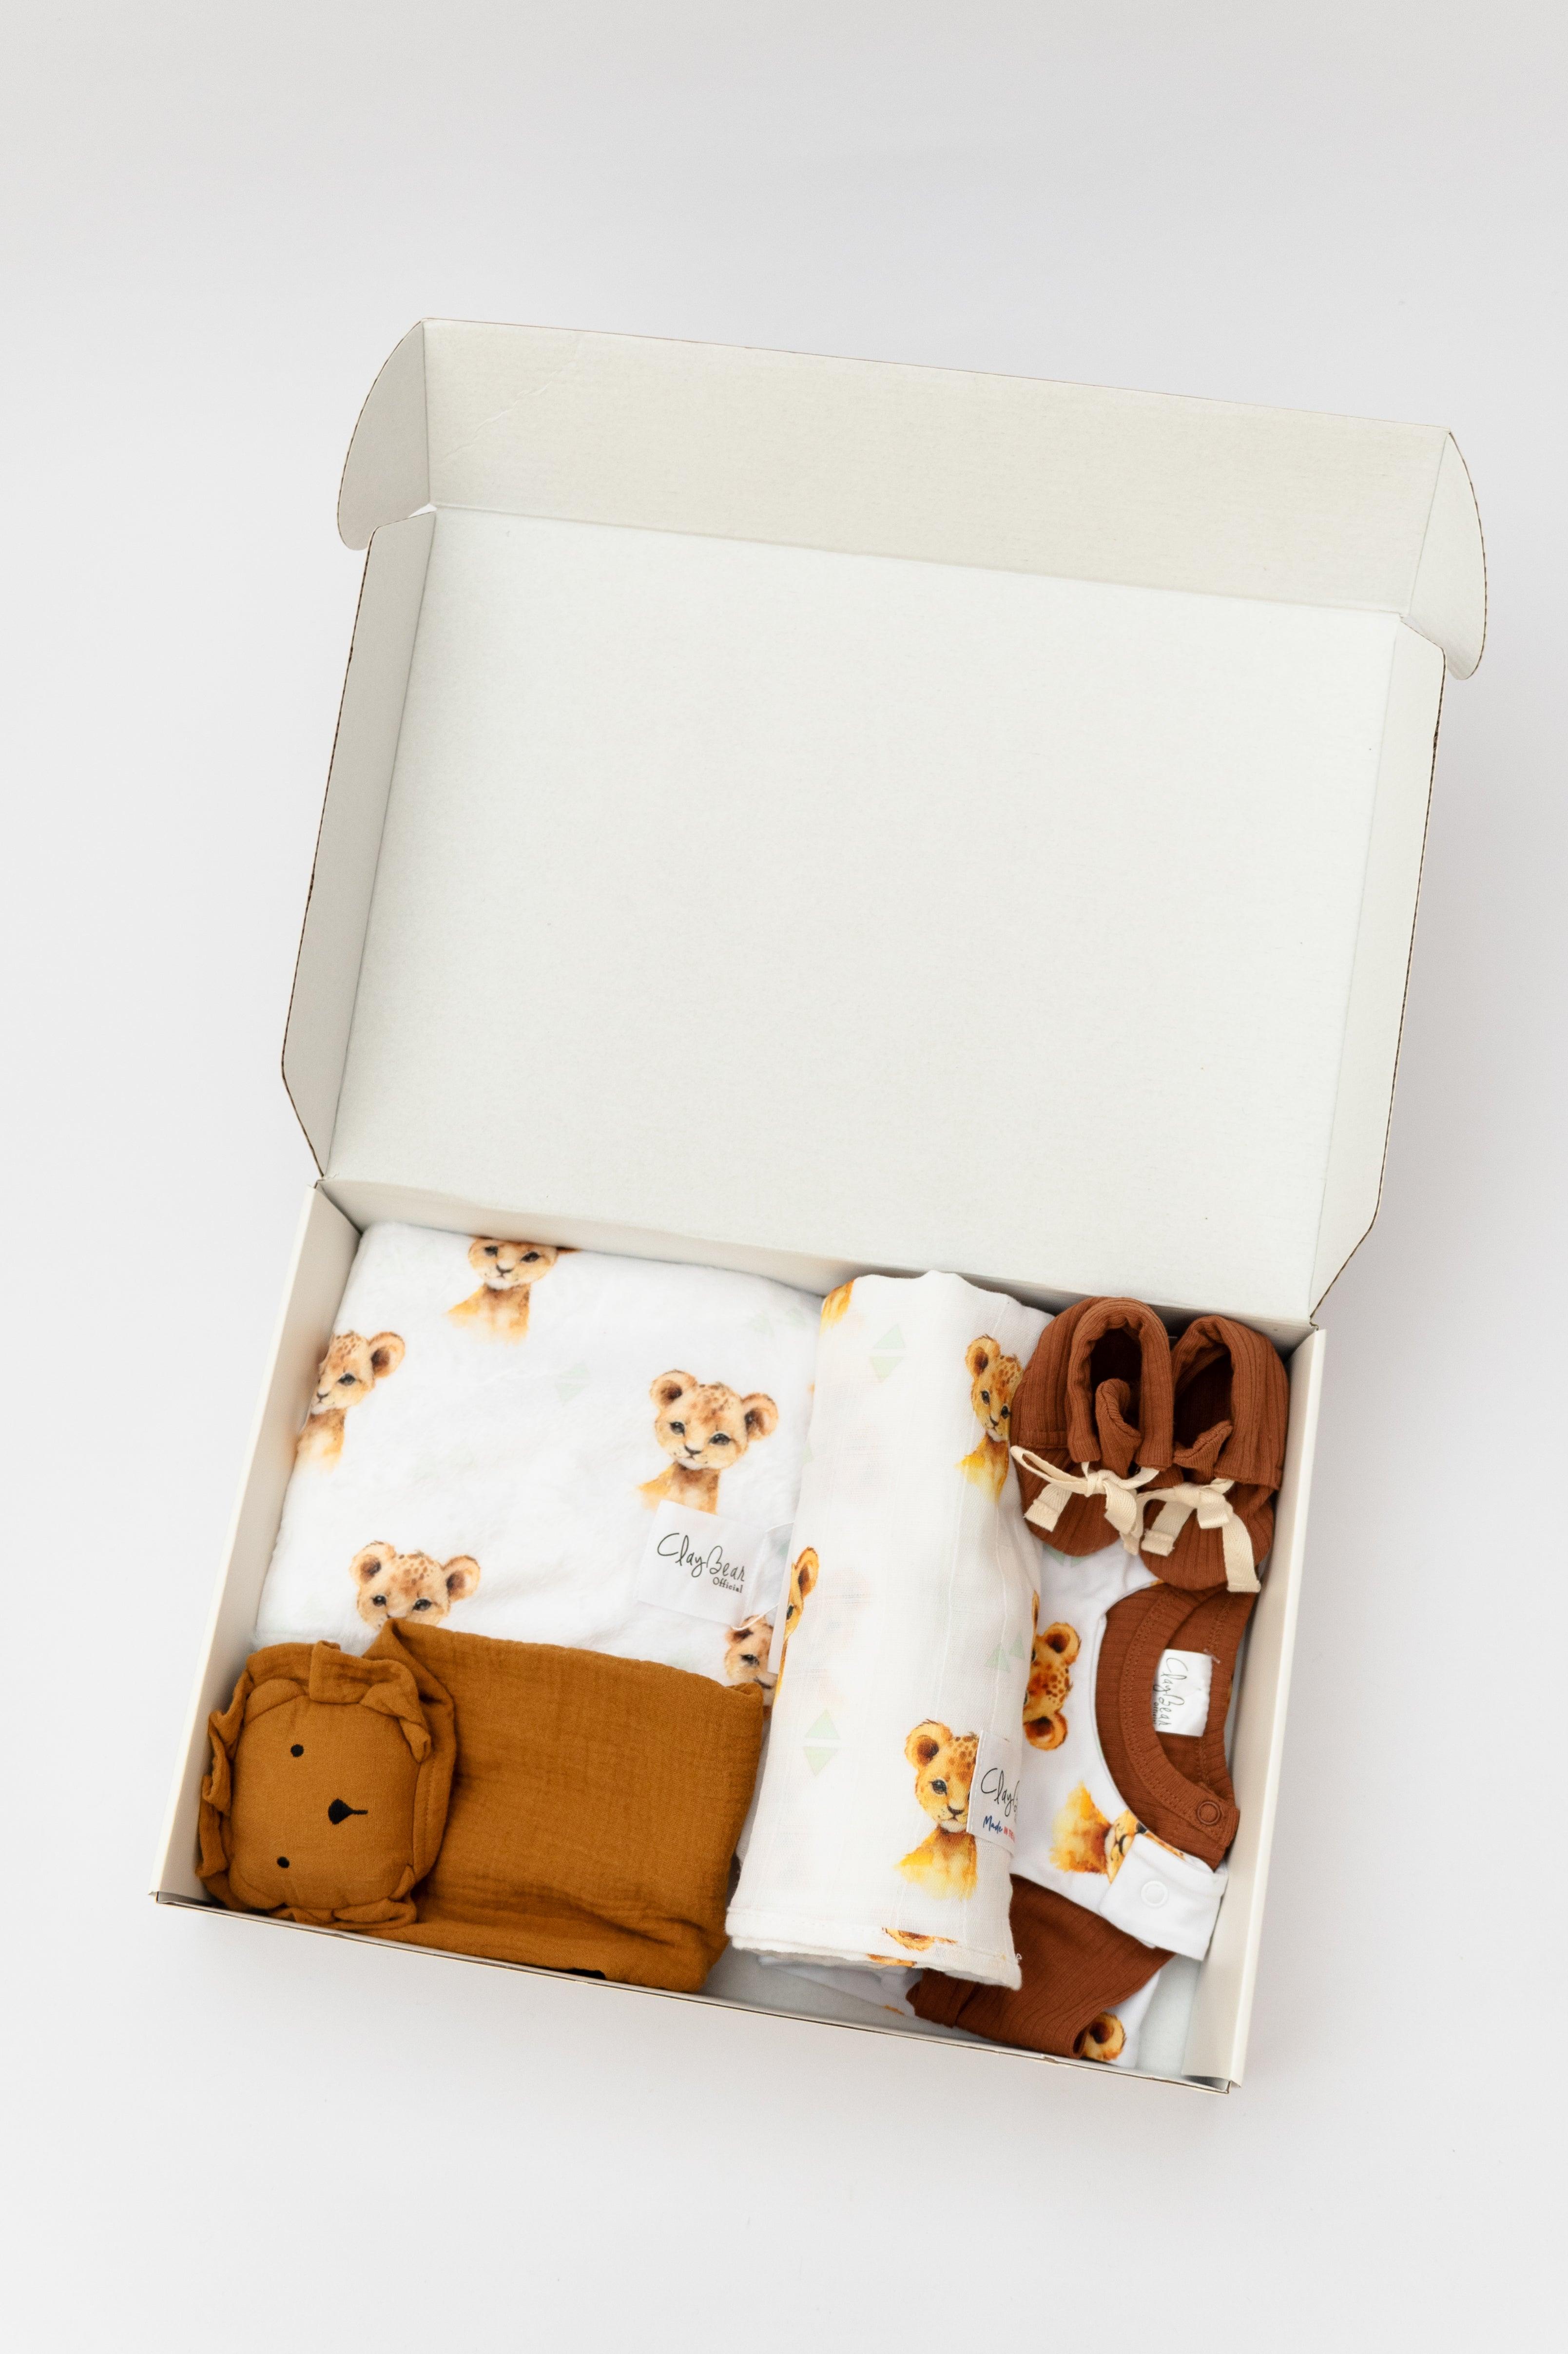 files/new-baby-gift-box-lion-cub-claybearofficial-4.jpg